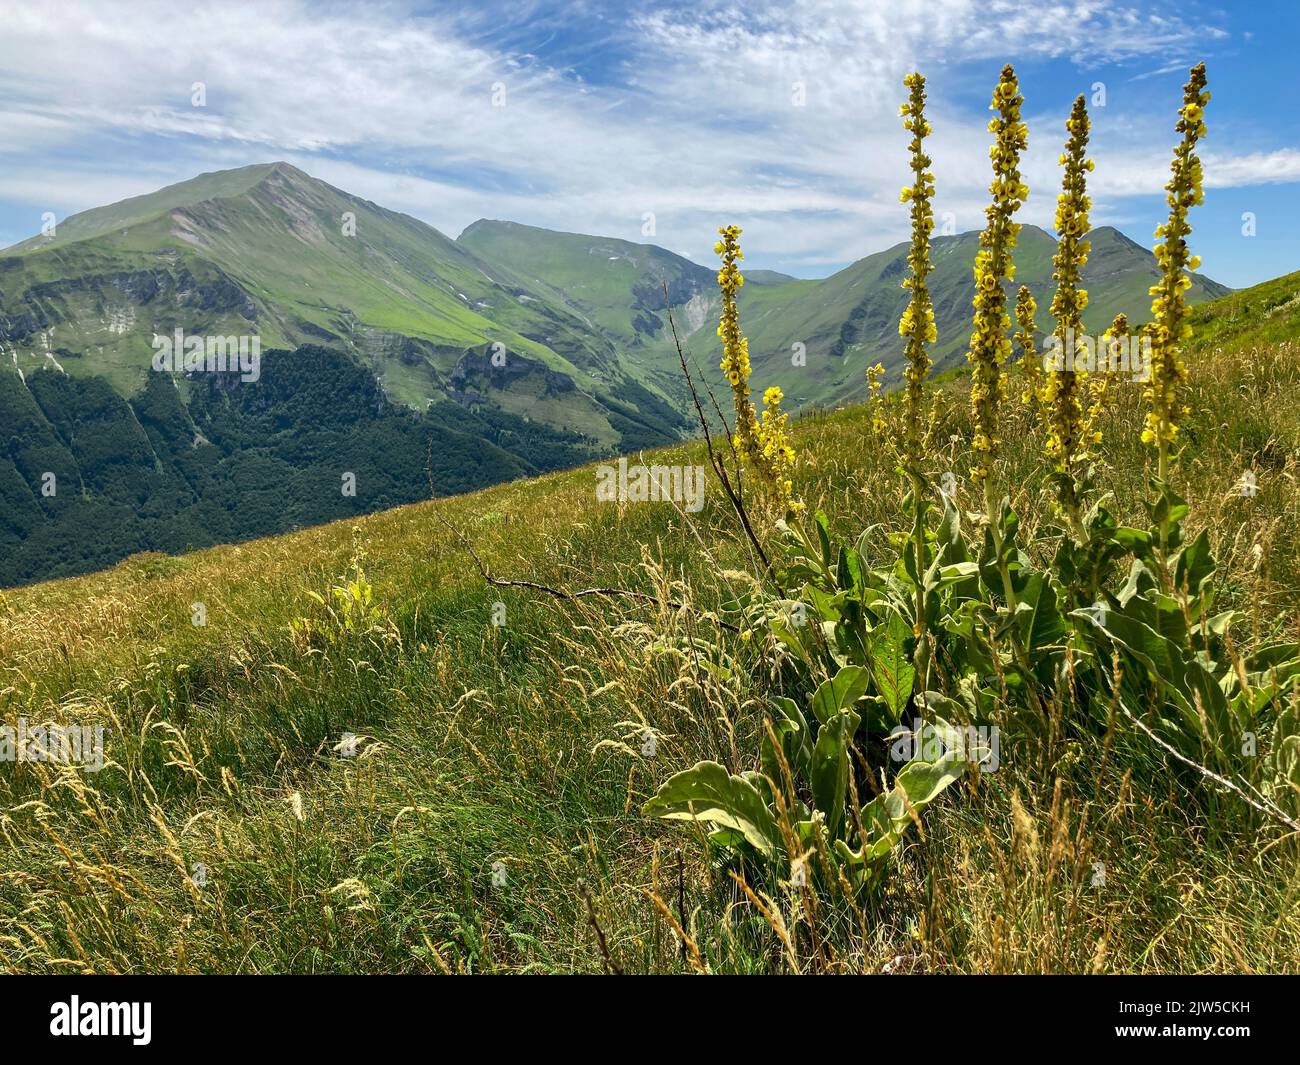 mullein plant, or Verbascum, and mountains of Monti Sibillini national park, Italy Stock Photo